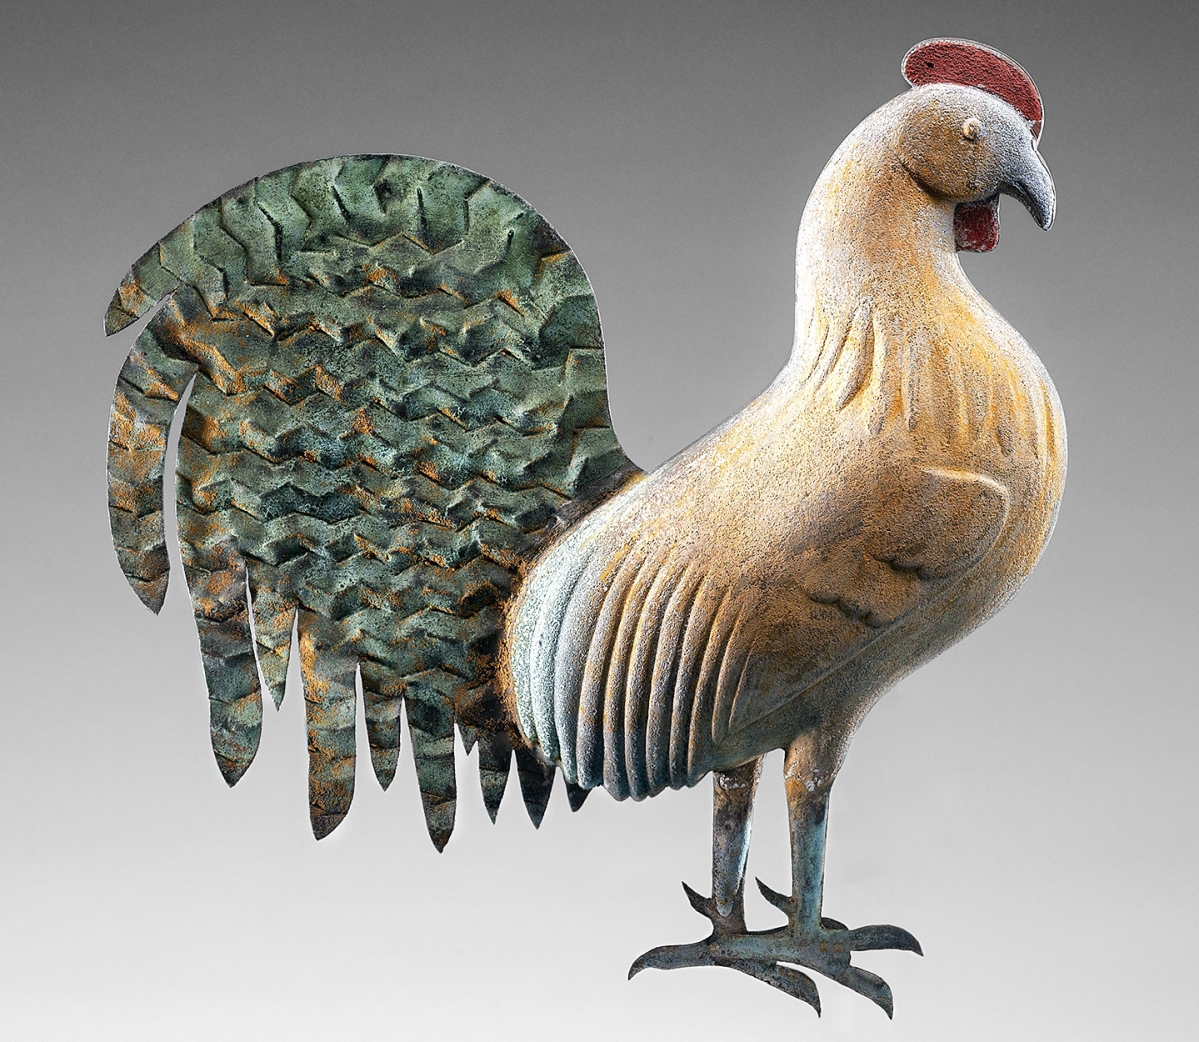 Small rooster by J. Howard & Co., West Bridgewater, Mass., circa 1856-67. Painted and gilded copper and cast zinc, 13 by 12½ by 3 inches. Collection of Jane and Gerald Katcher, photo Gavin Ashworth.